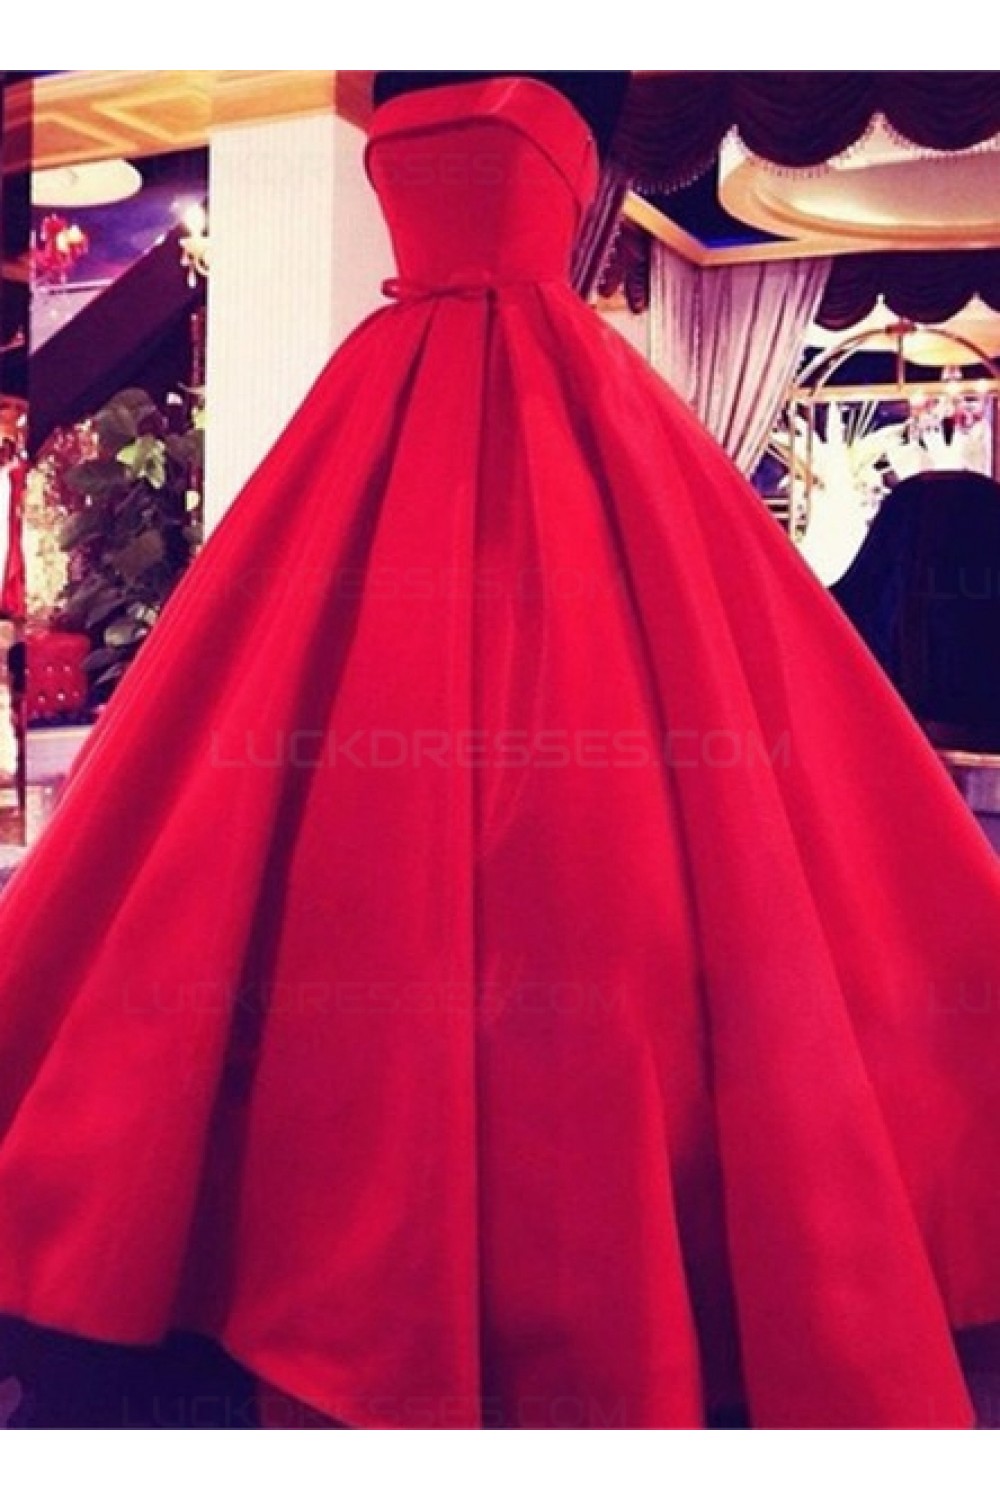 red strapless ball gown